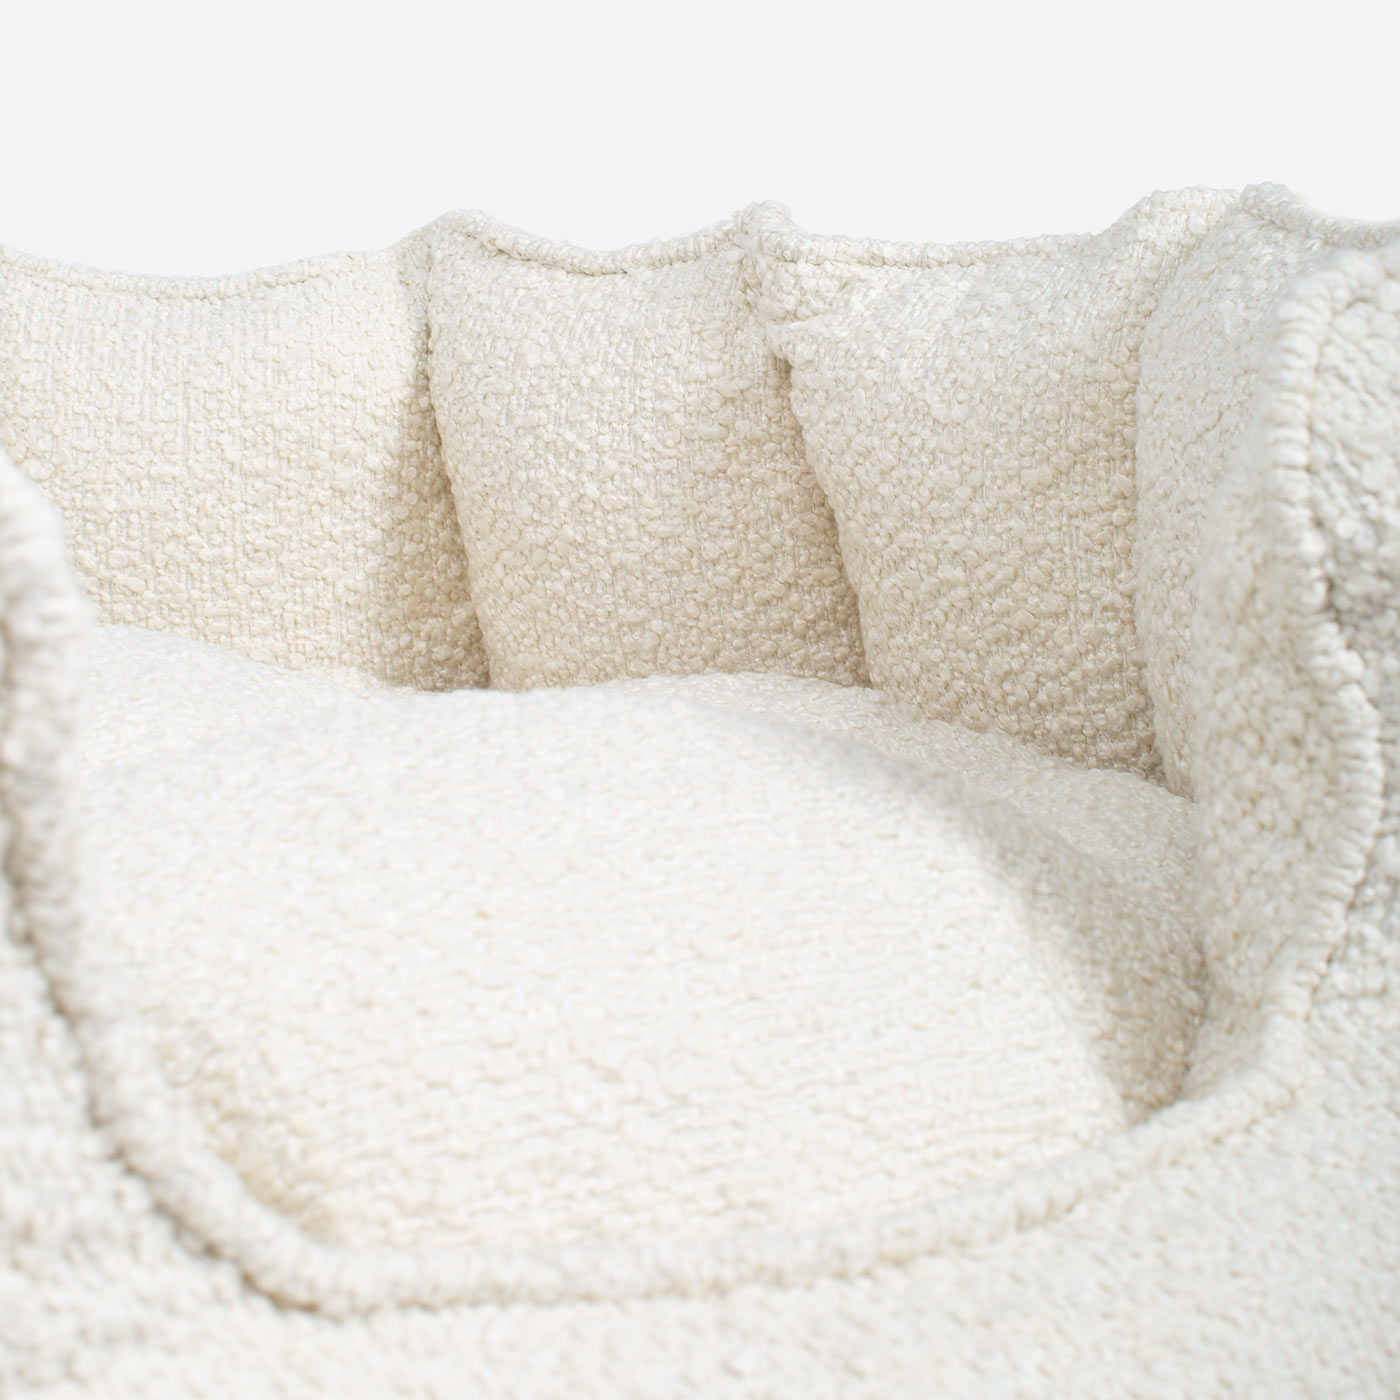 Discover Our Luxurious High Wall Bed For Cats & Kittens, Featuring inner pillow with plush teddy fleece on one side To Craft The Perfect Cat Bed In Stunning Ivory Boucle! Available To Personalise Now at Lords & Labradors 